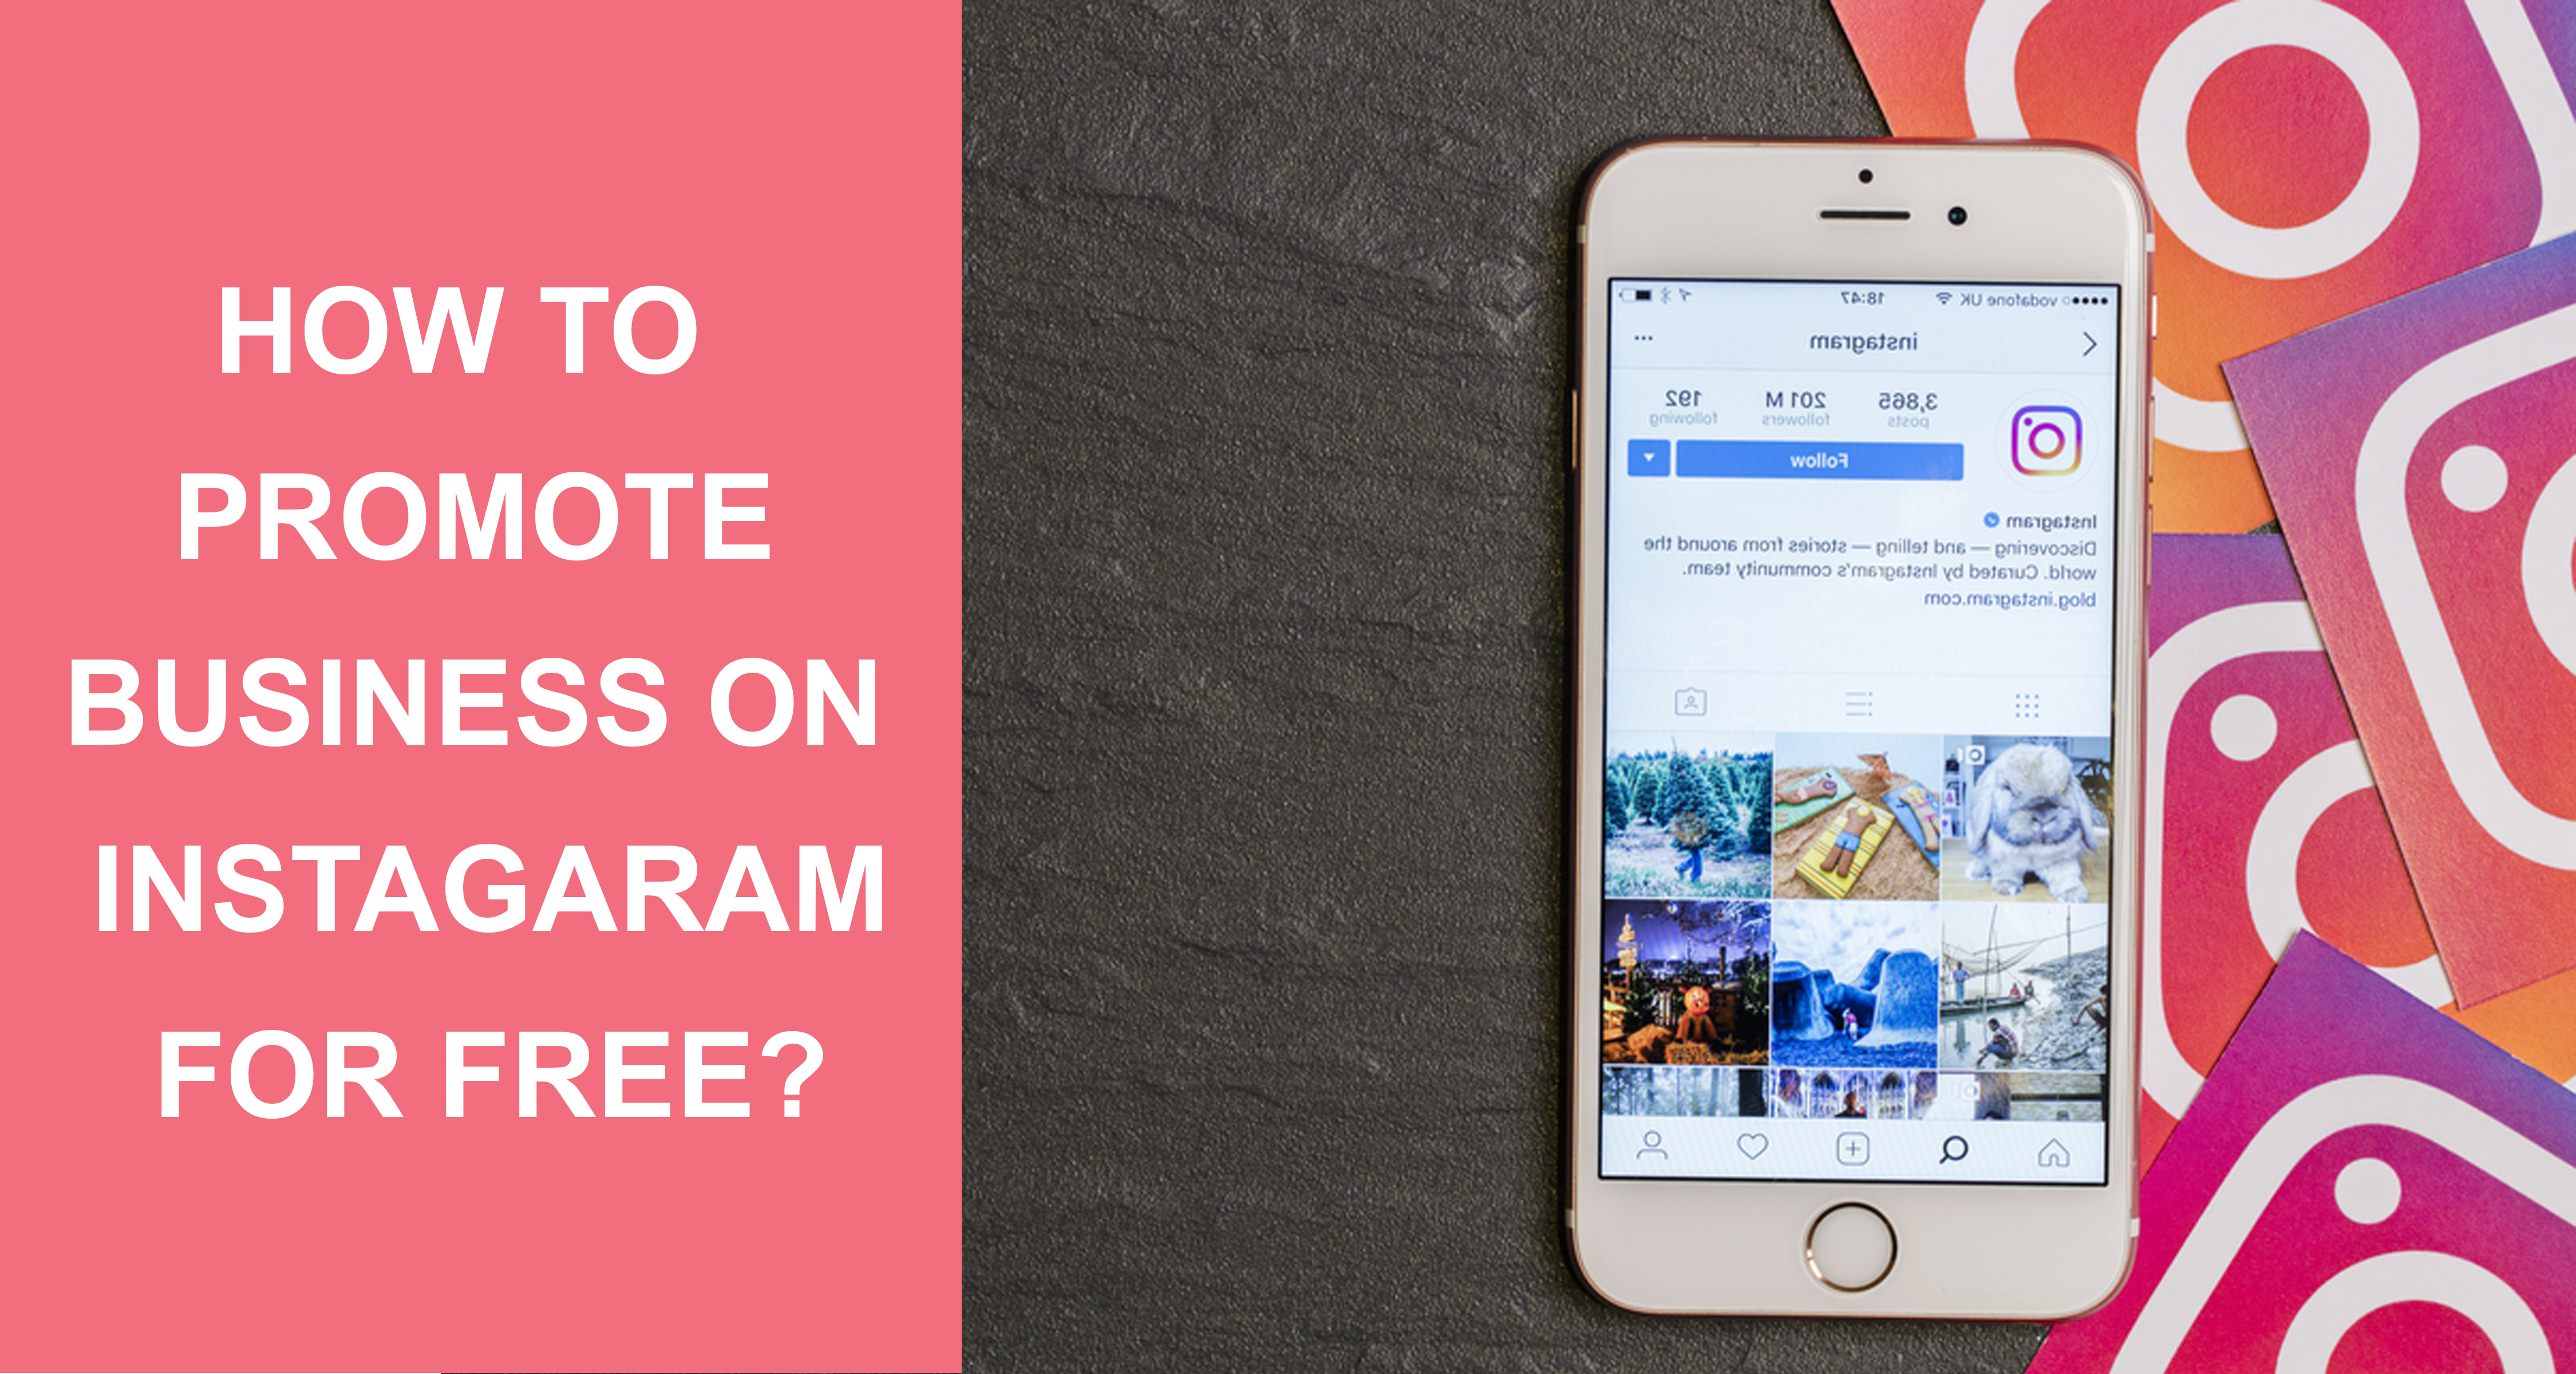 How To Promote Your Business On Instagram For Free